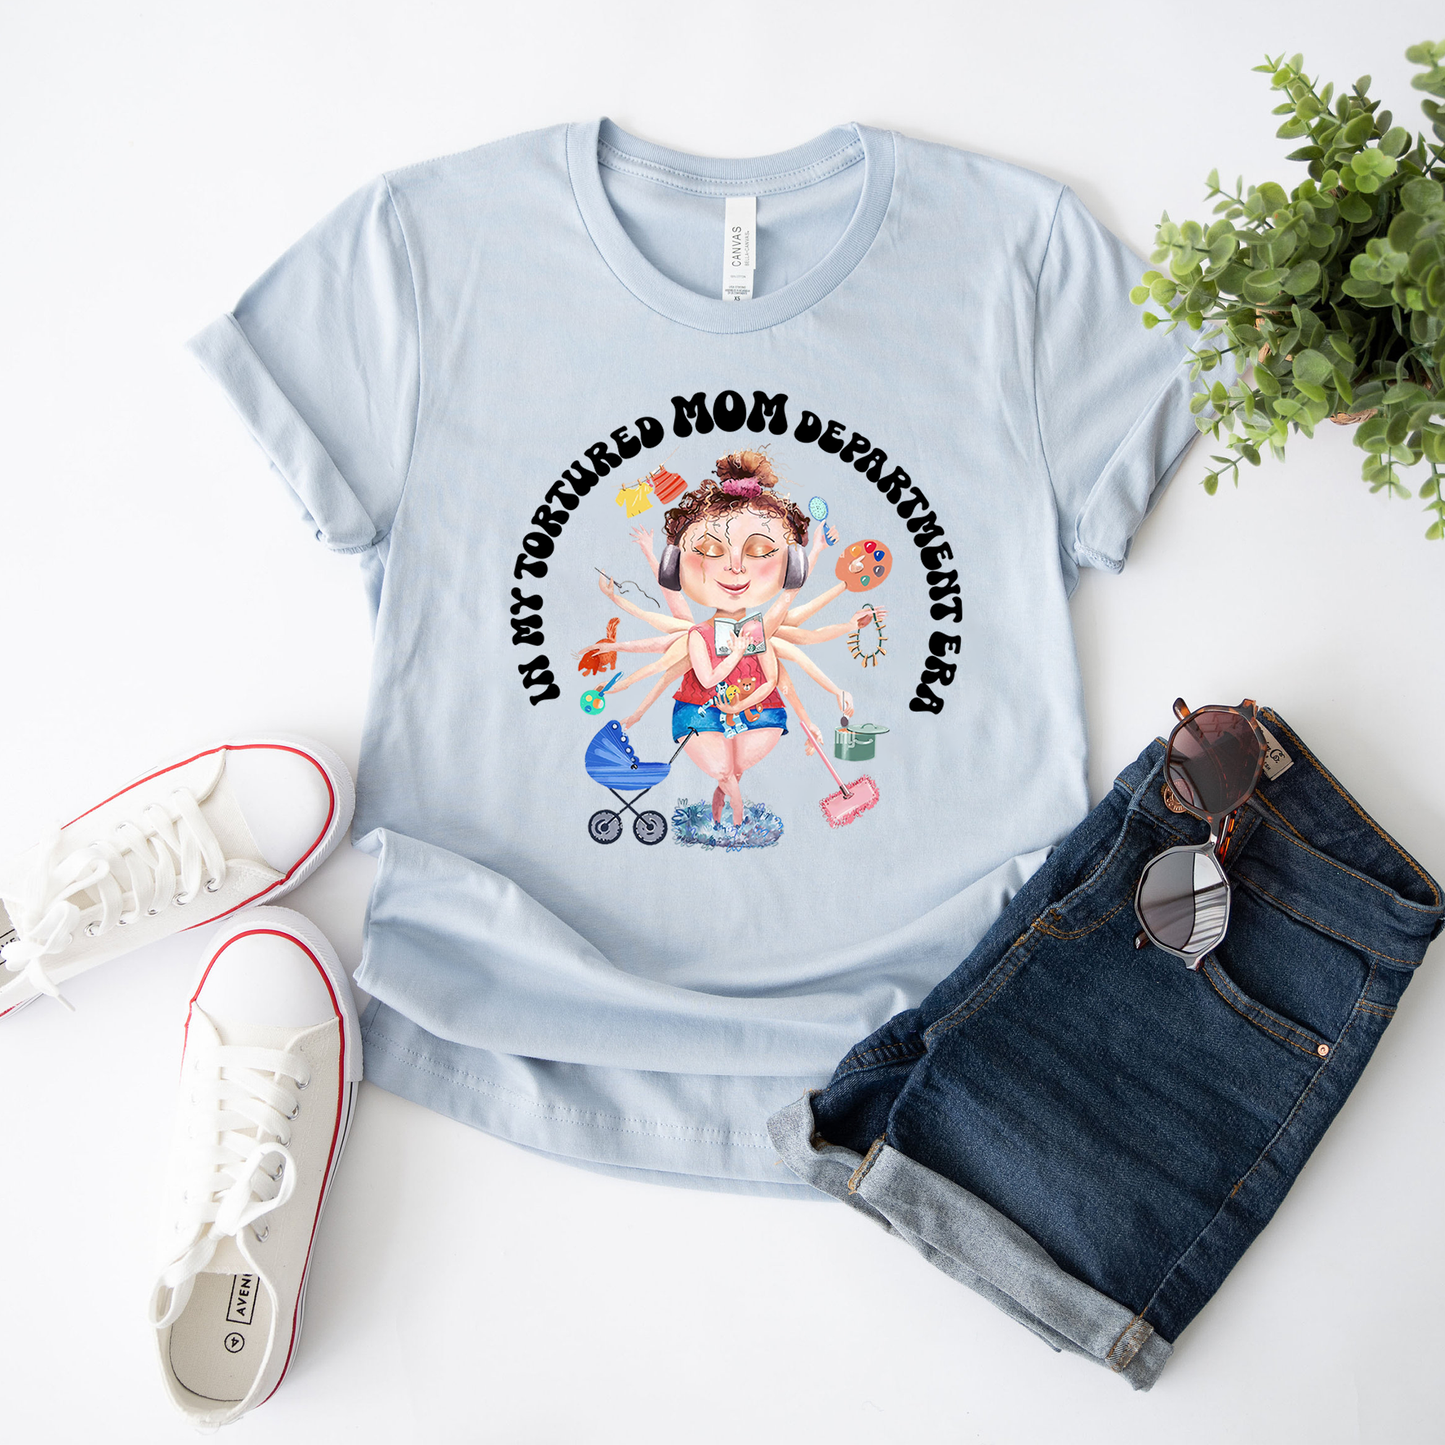 In My Tortured Mom Department Era Funny T-shirt, In My Mom Era Mother's day Gift T-shirt